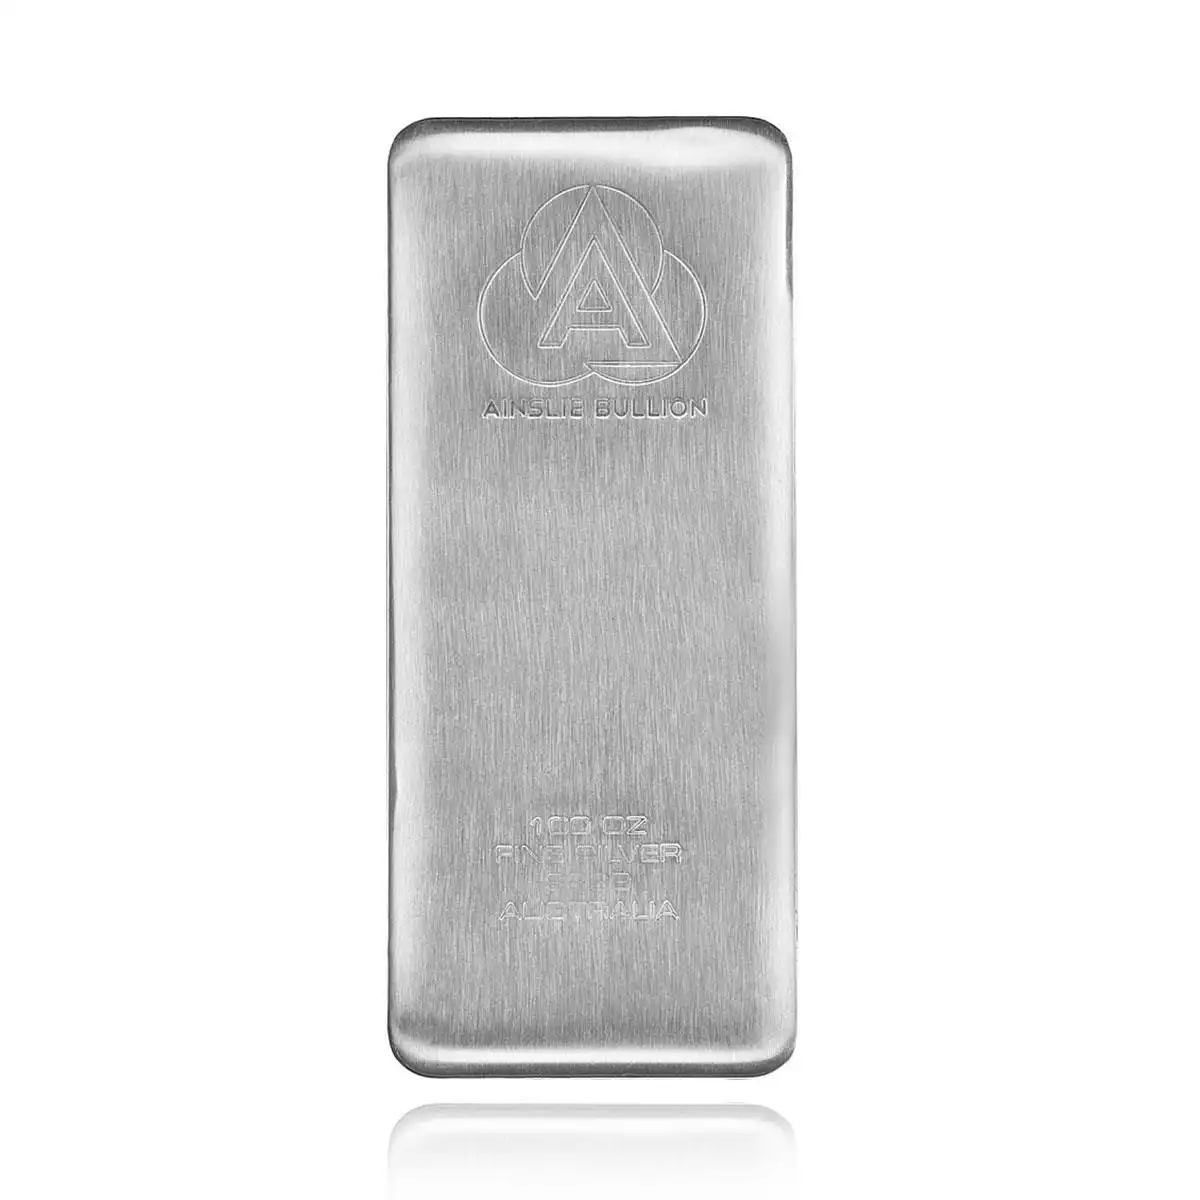 100oz silver bullion ainslie cast bars. the 100oz cast ainslie silver bar is an excellent way for investors to buy at an economical yet still manageab...